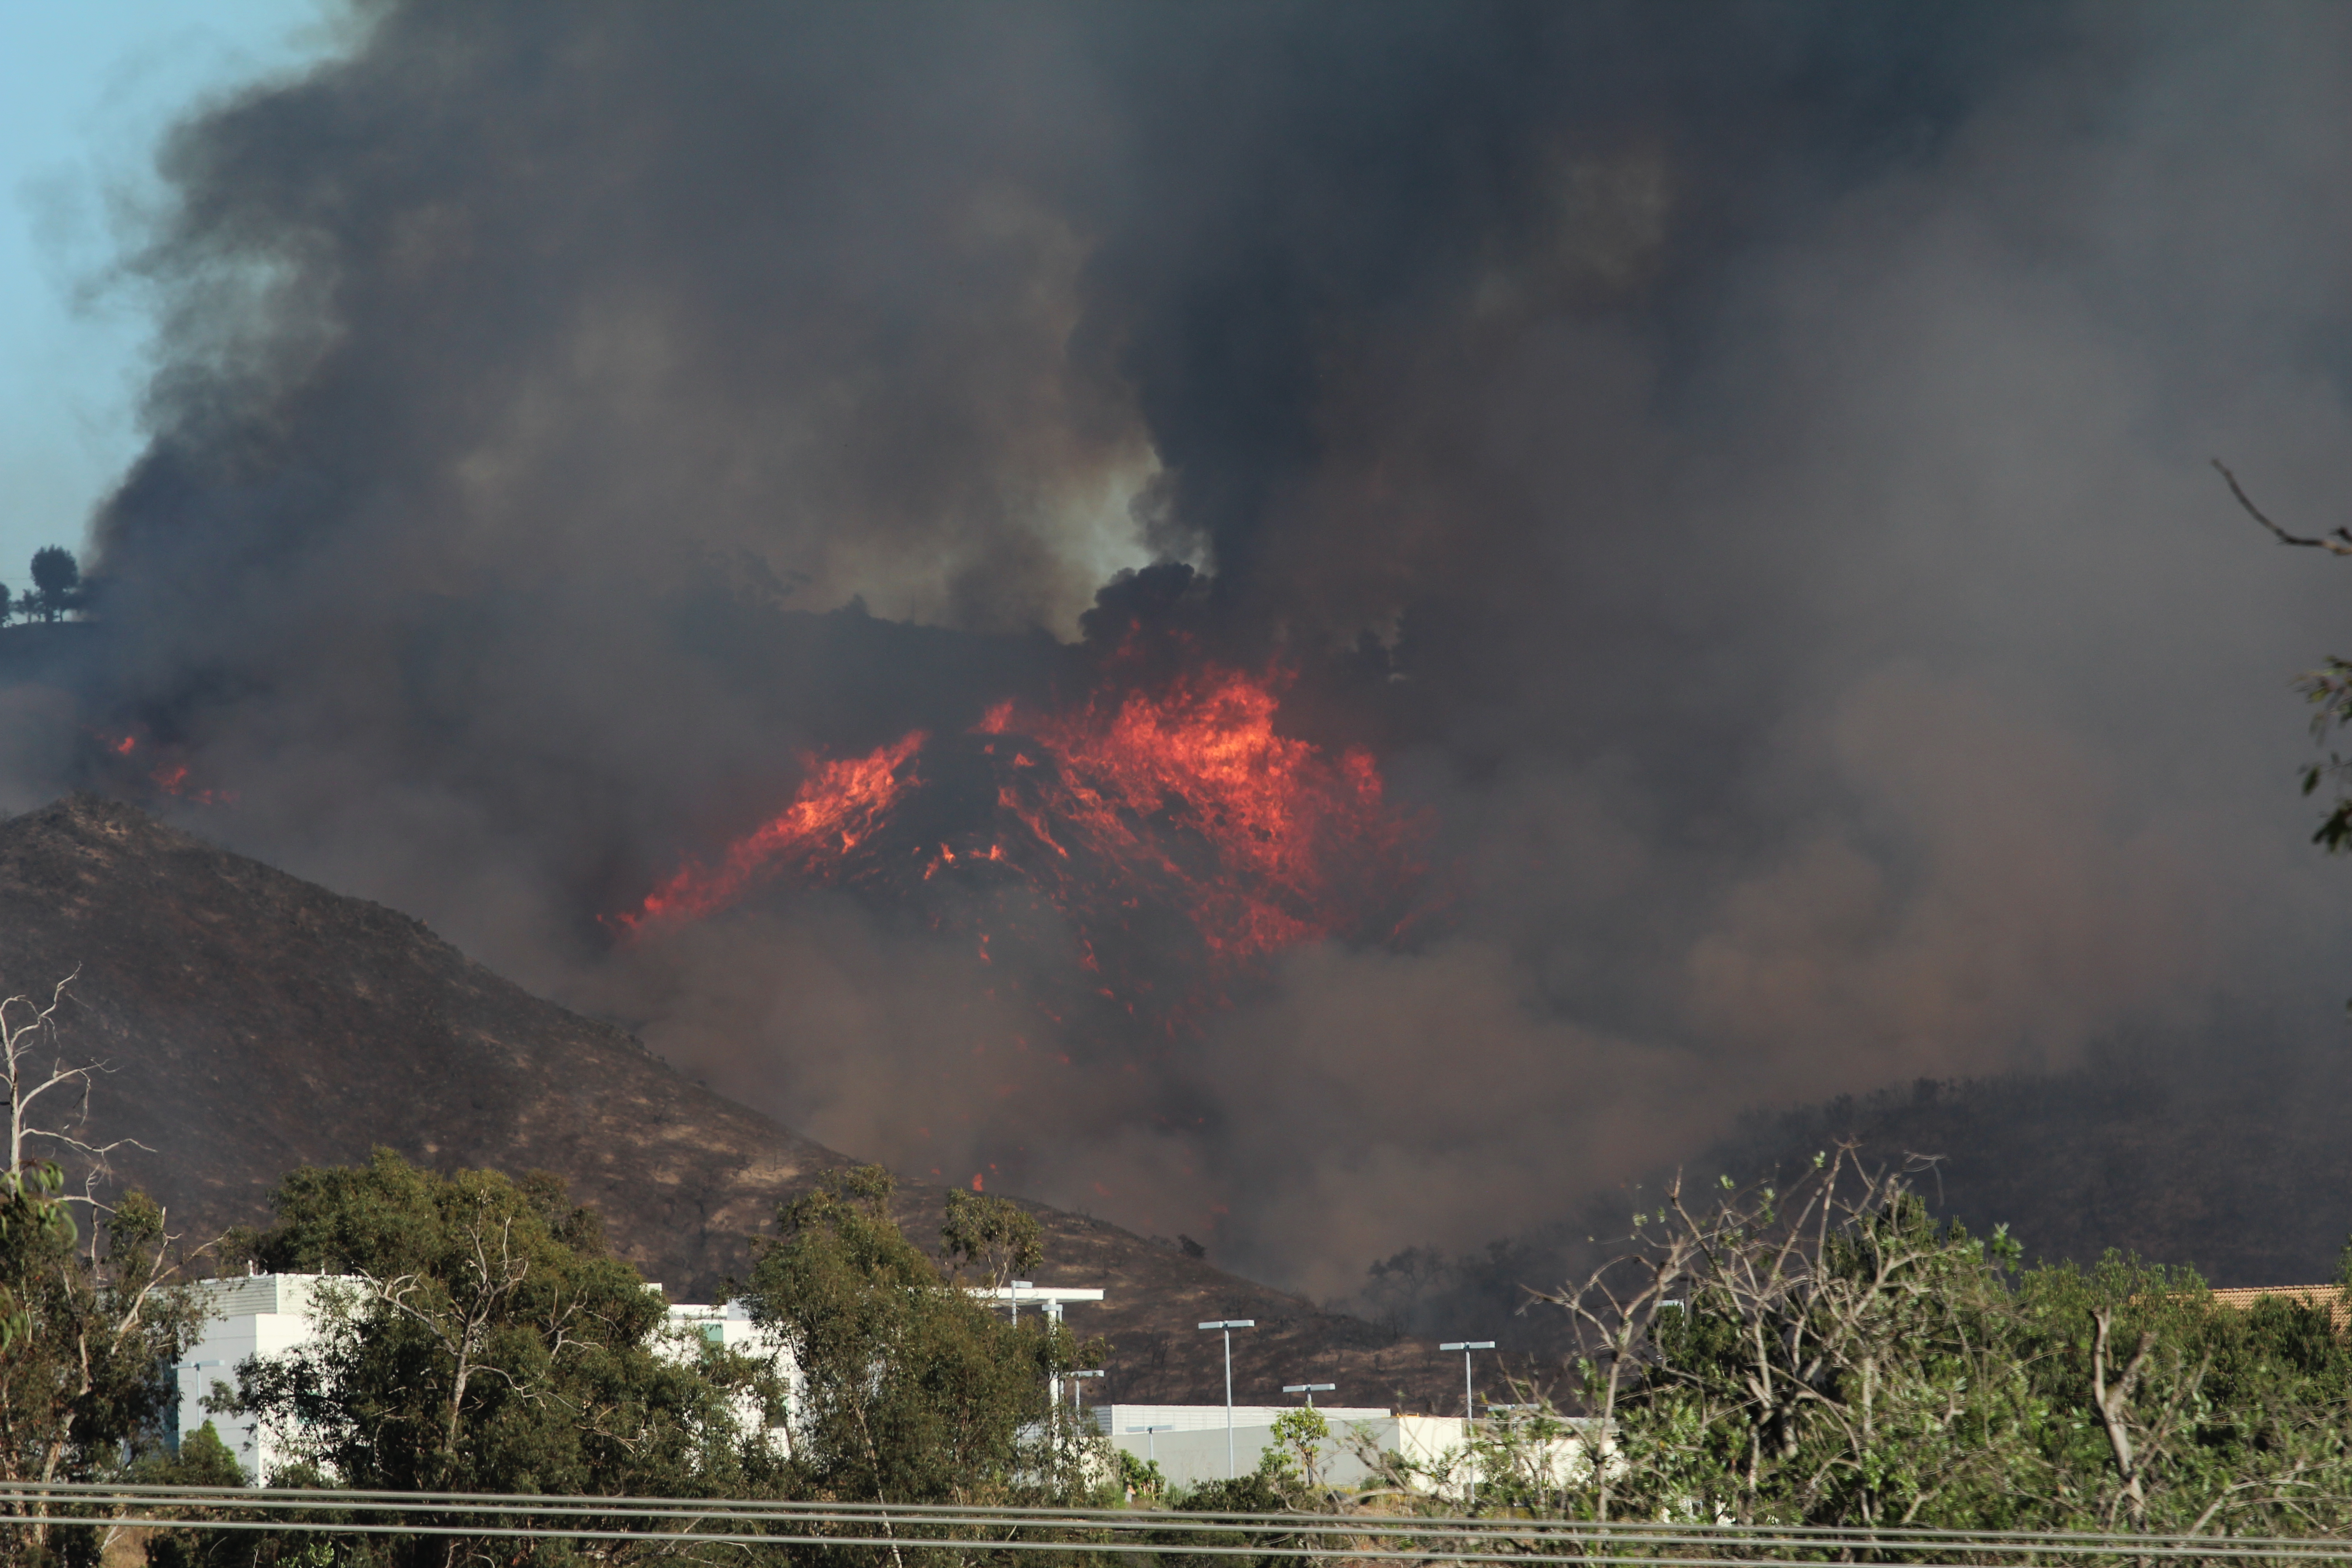 The San Marcos fire continues to burn uncontained.Fire officals have stated the coco fire is the countys No. 1 Priority. Classes at Palomar College will resume on friday. (Joe Davis/The Telescope)